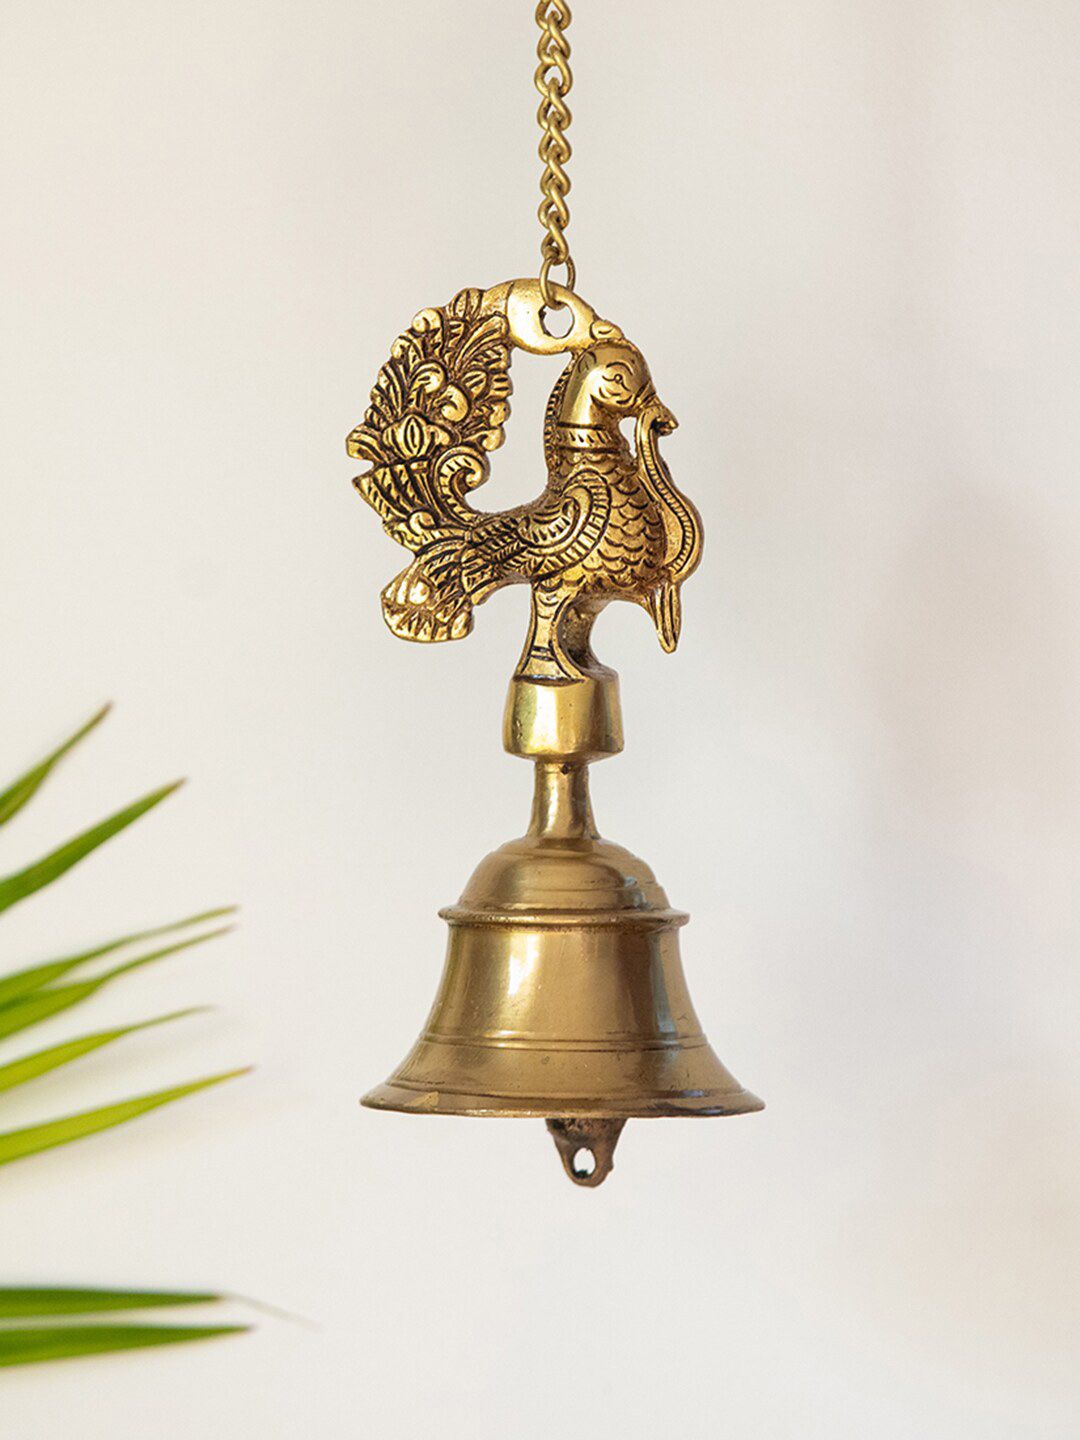 ExclusiveLane Gold-Toned Elegant Peacock Hand-Etched Decorative Hanging Bell Price in India